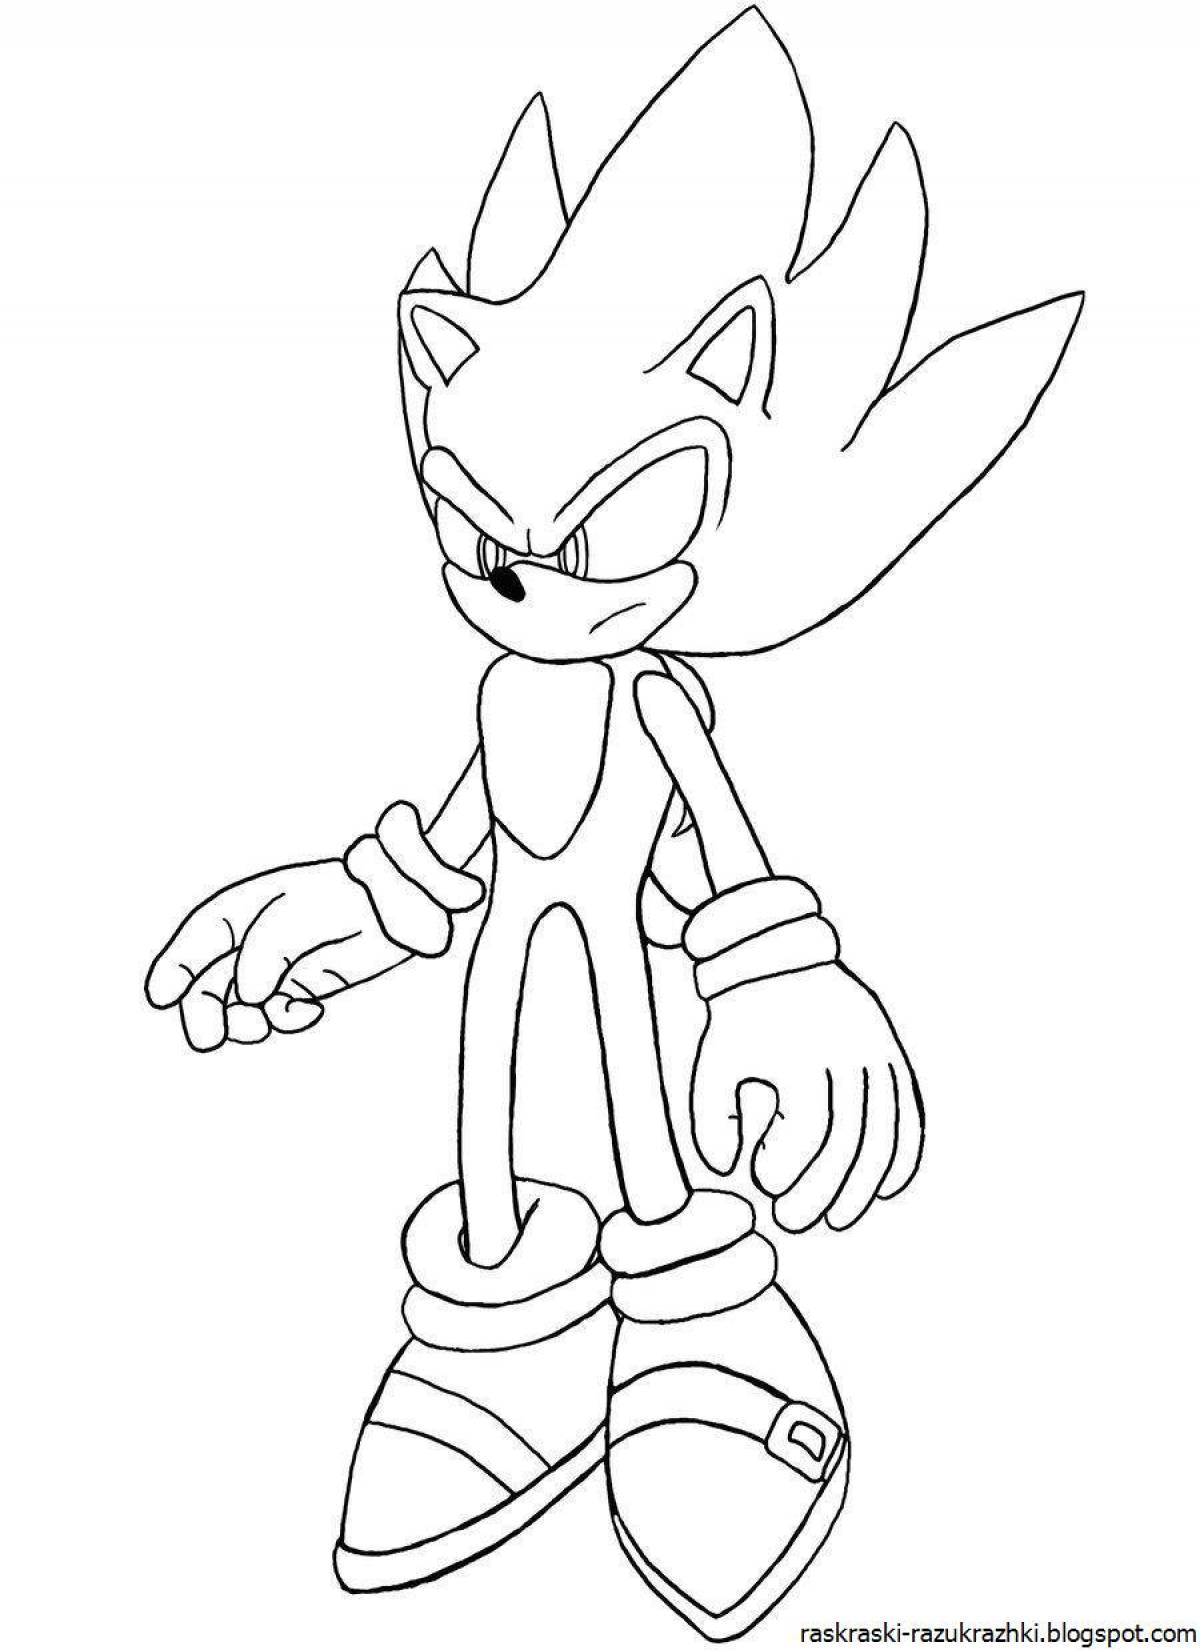 Sonic.exe coloring page